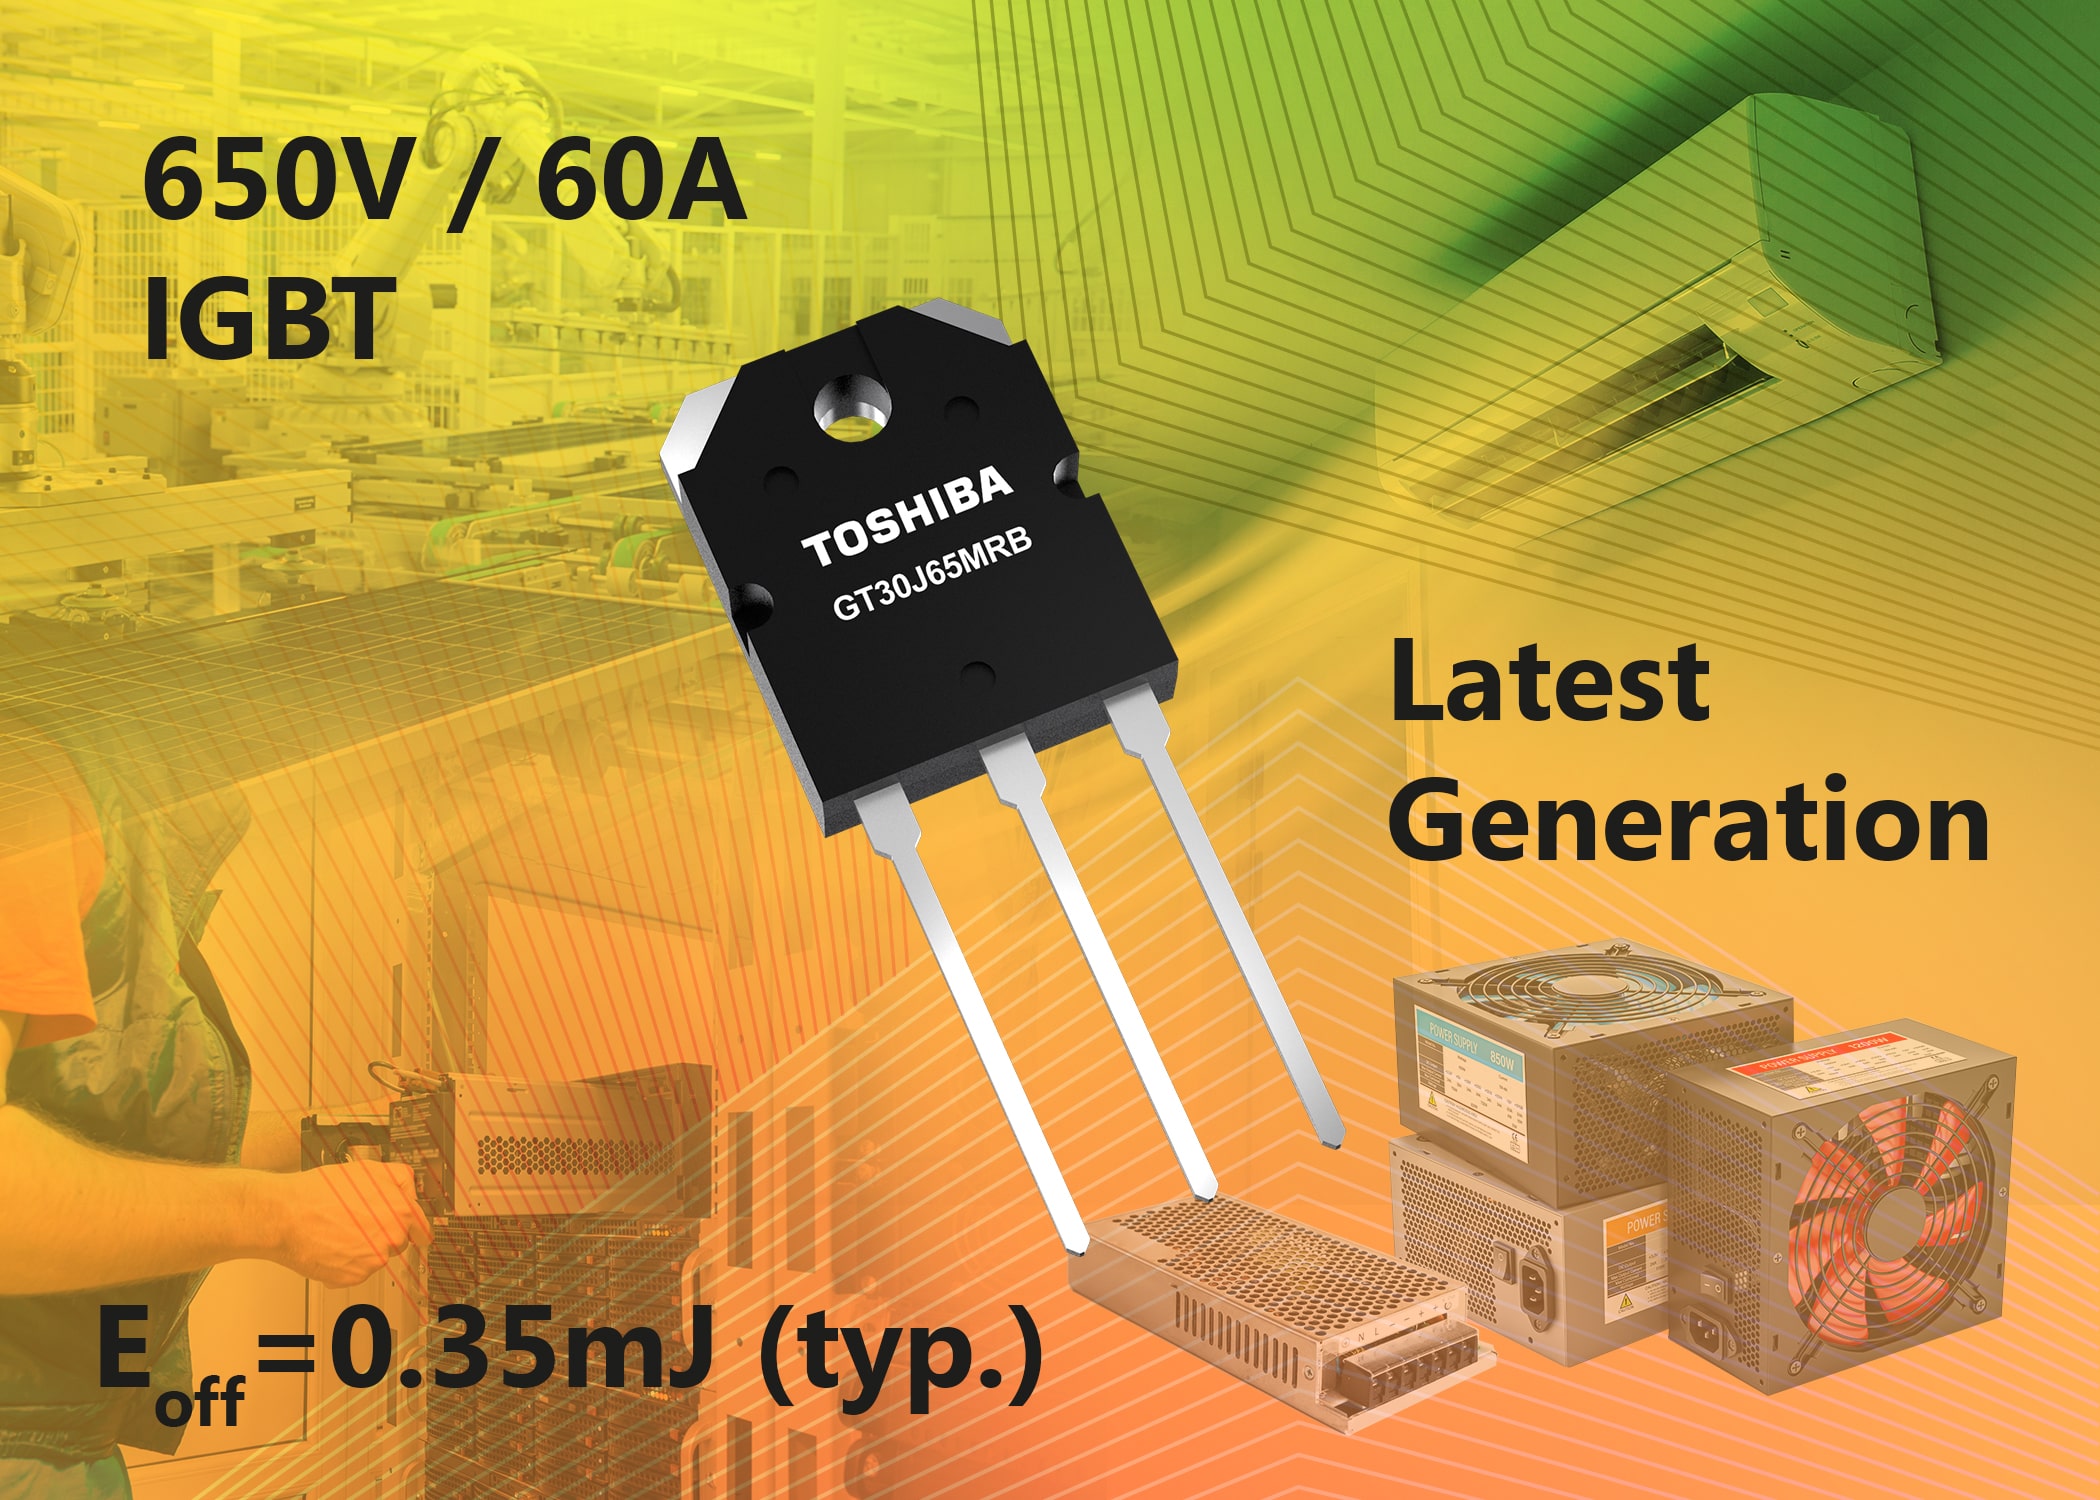 Toshiba announces new IGBT device based upon latest generation semiconductor process